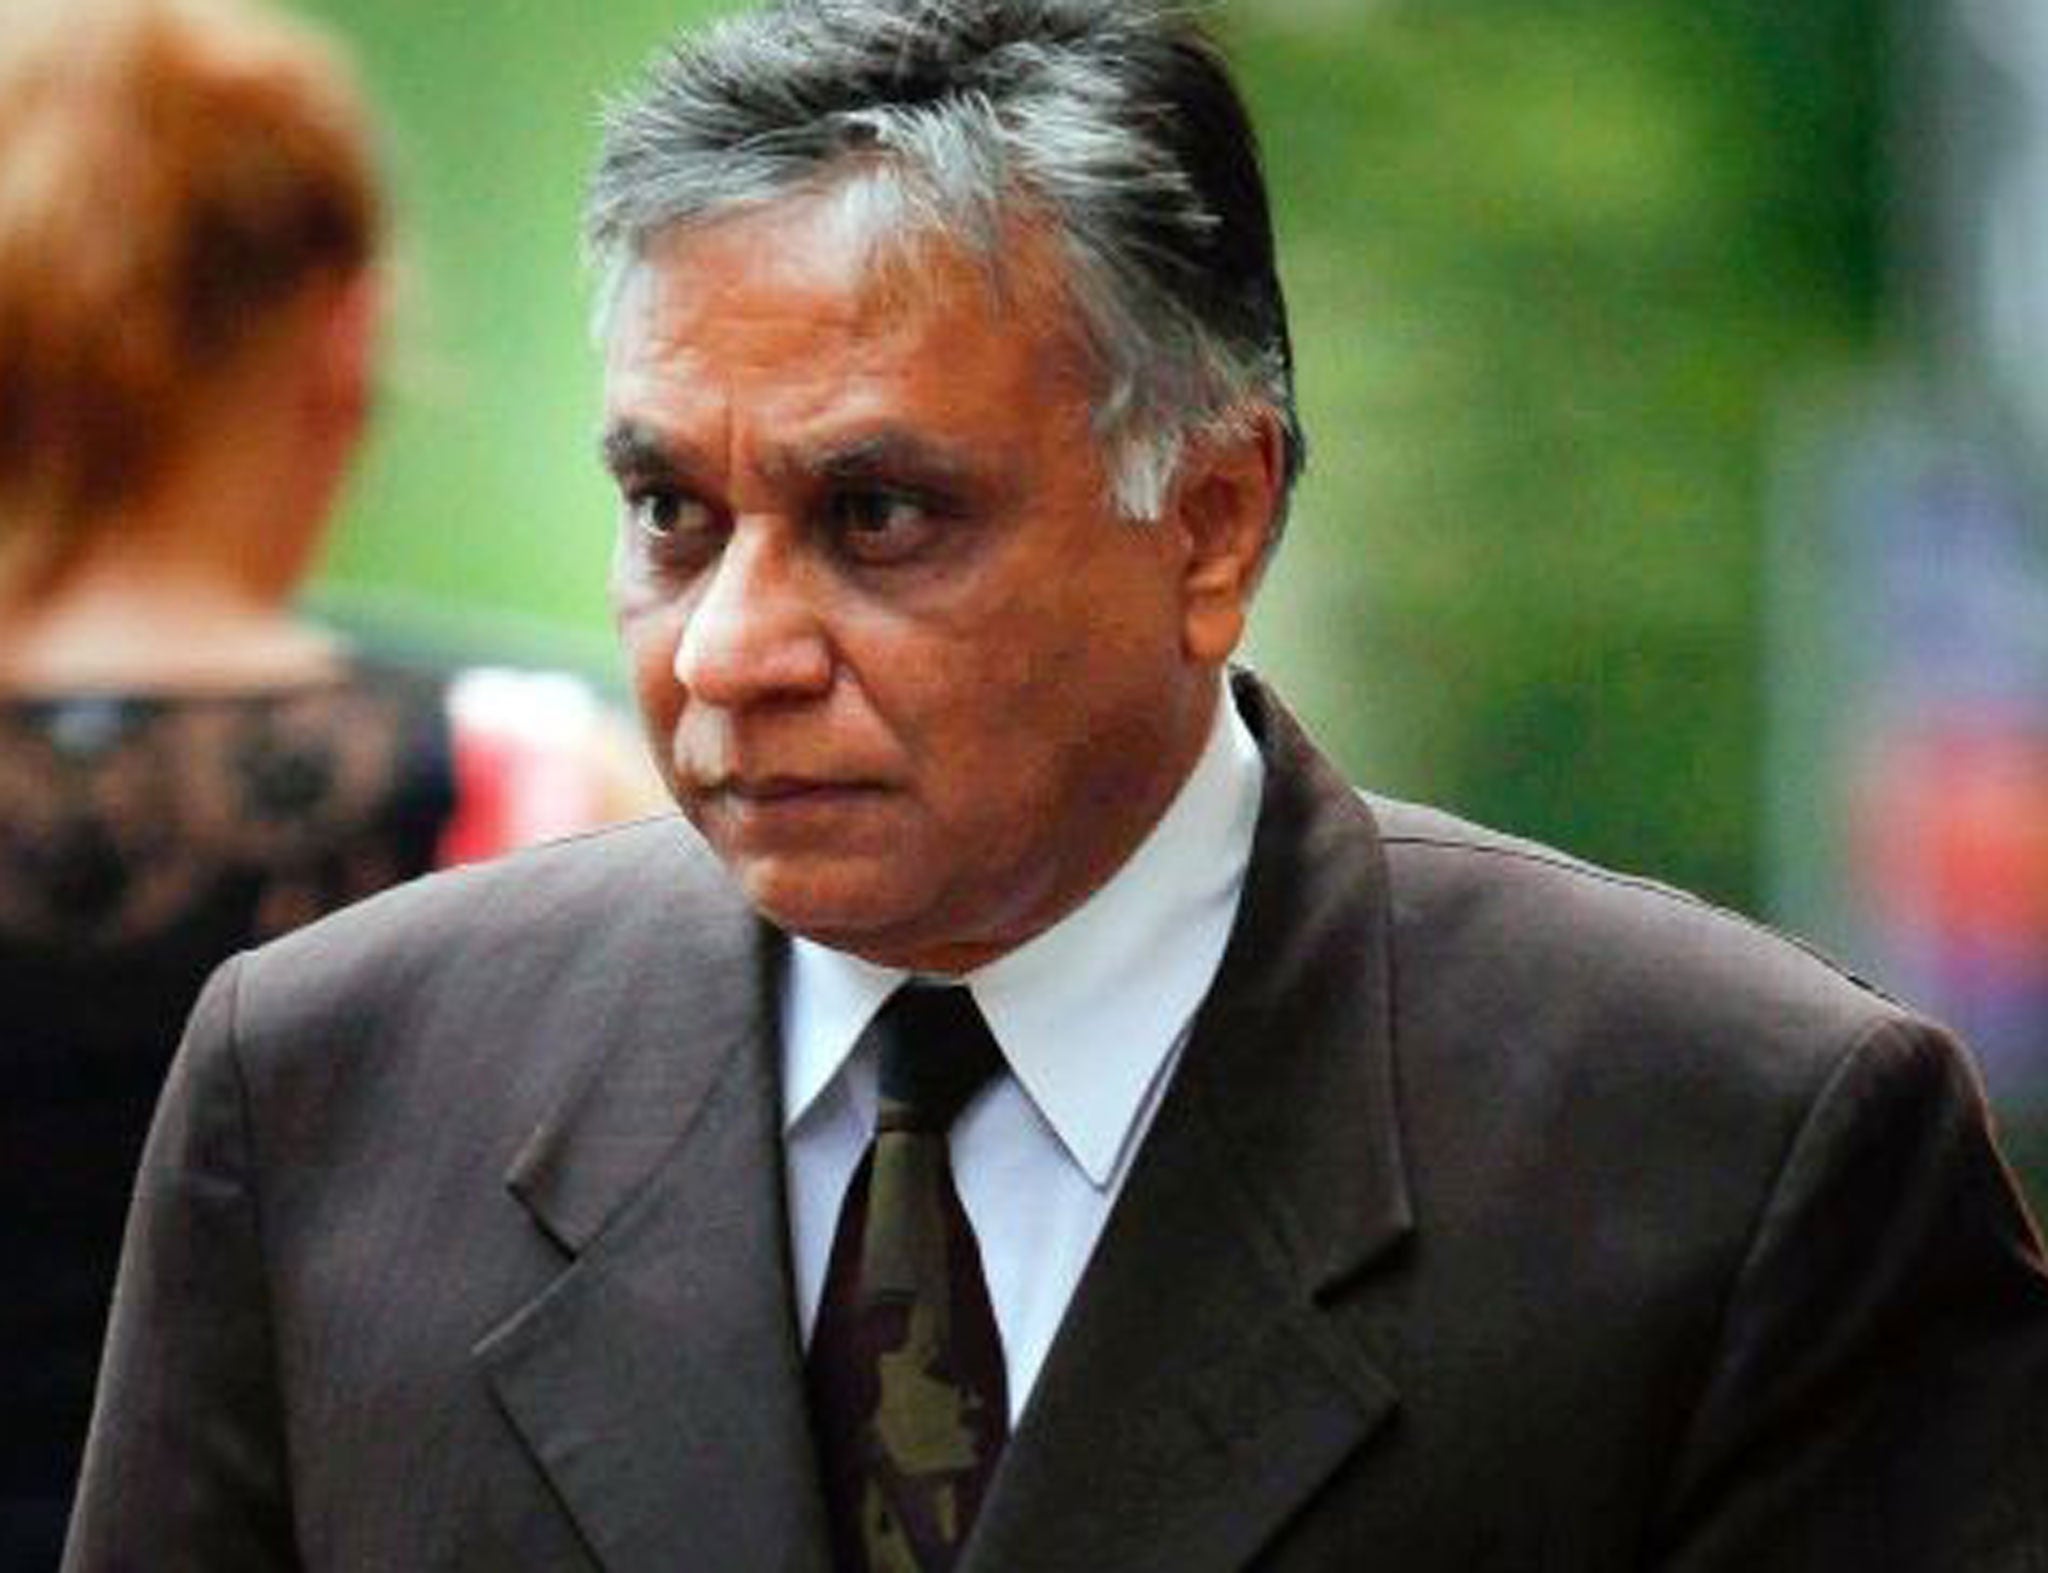 Jayant Patel allegedly operated on a man who was “moaning and screaming” because he was not anaesthetised